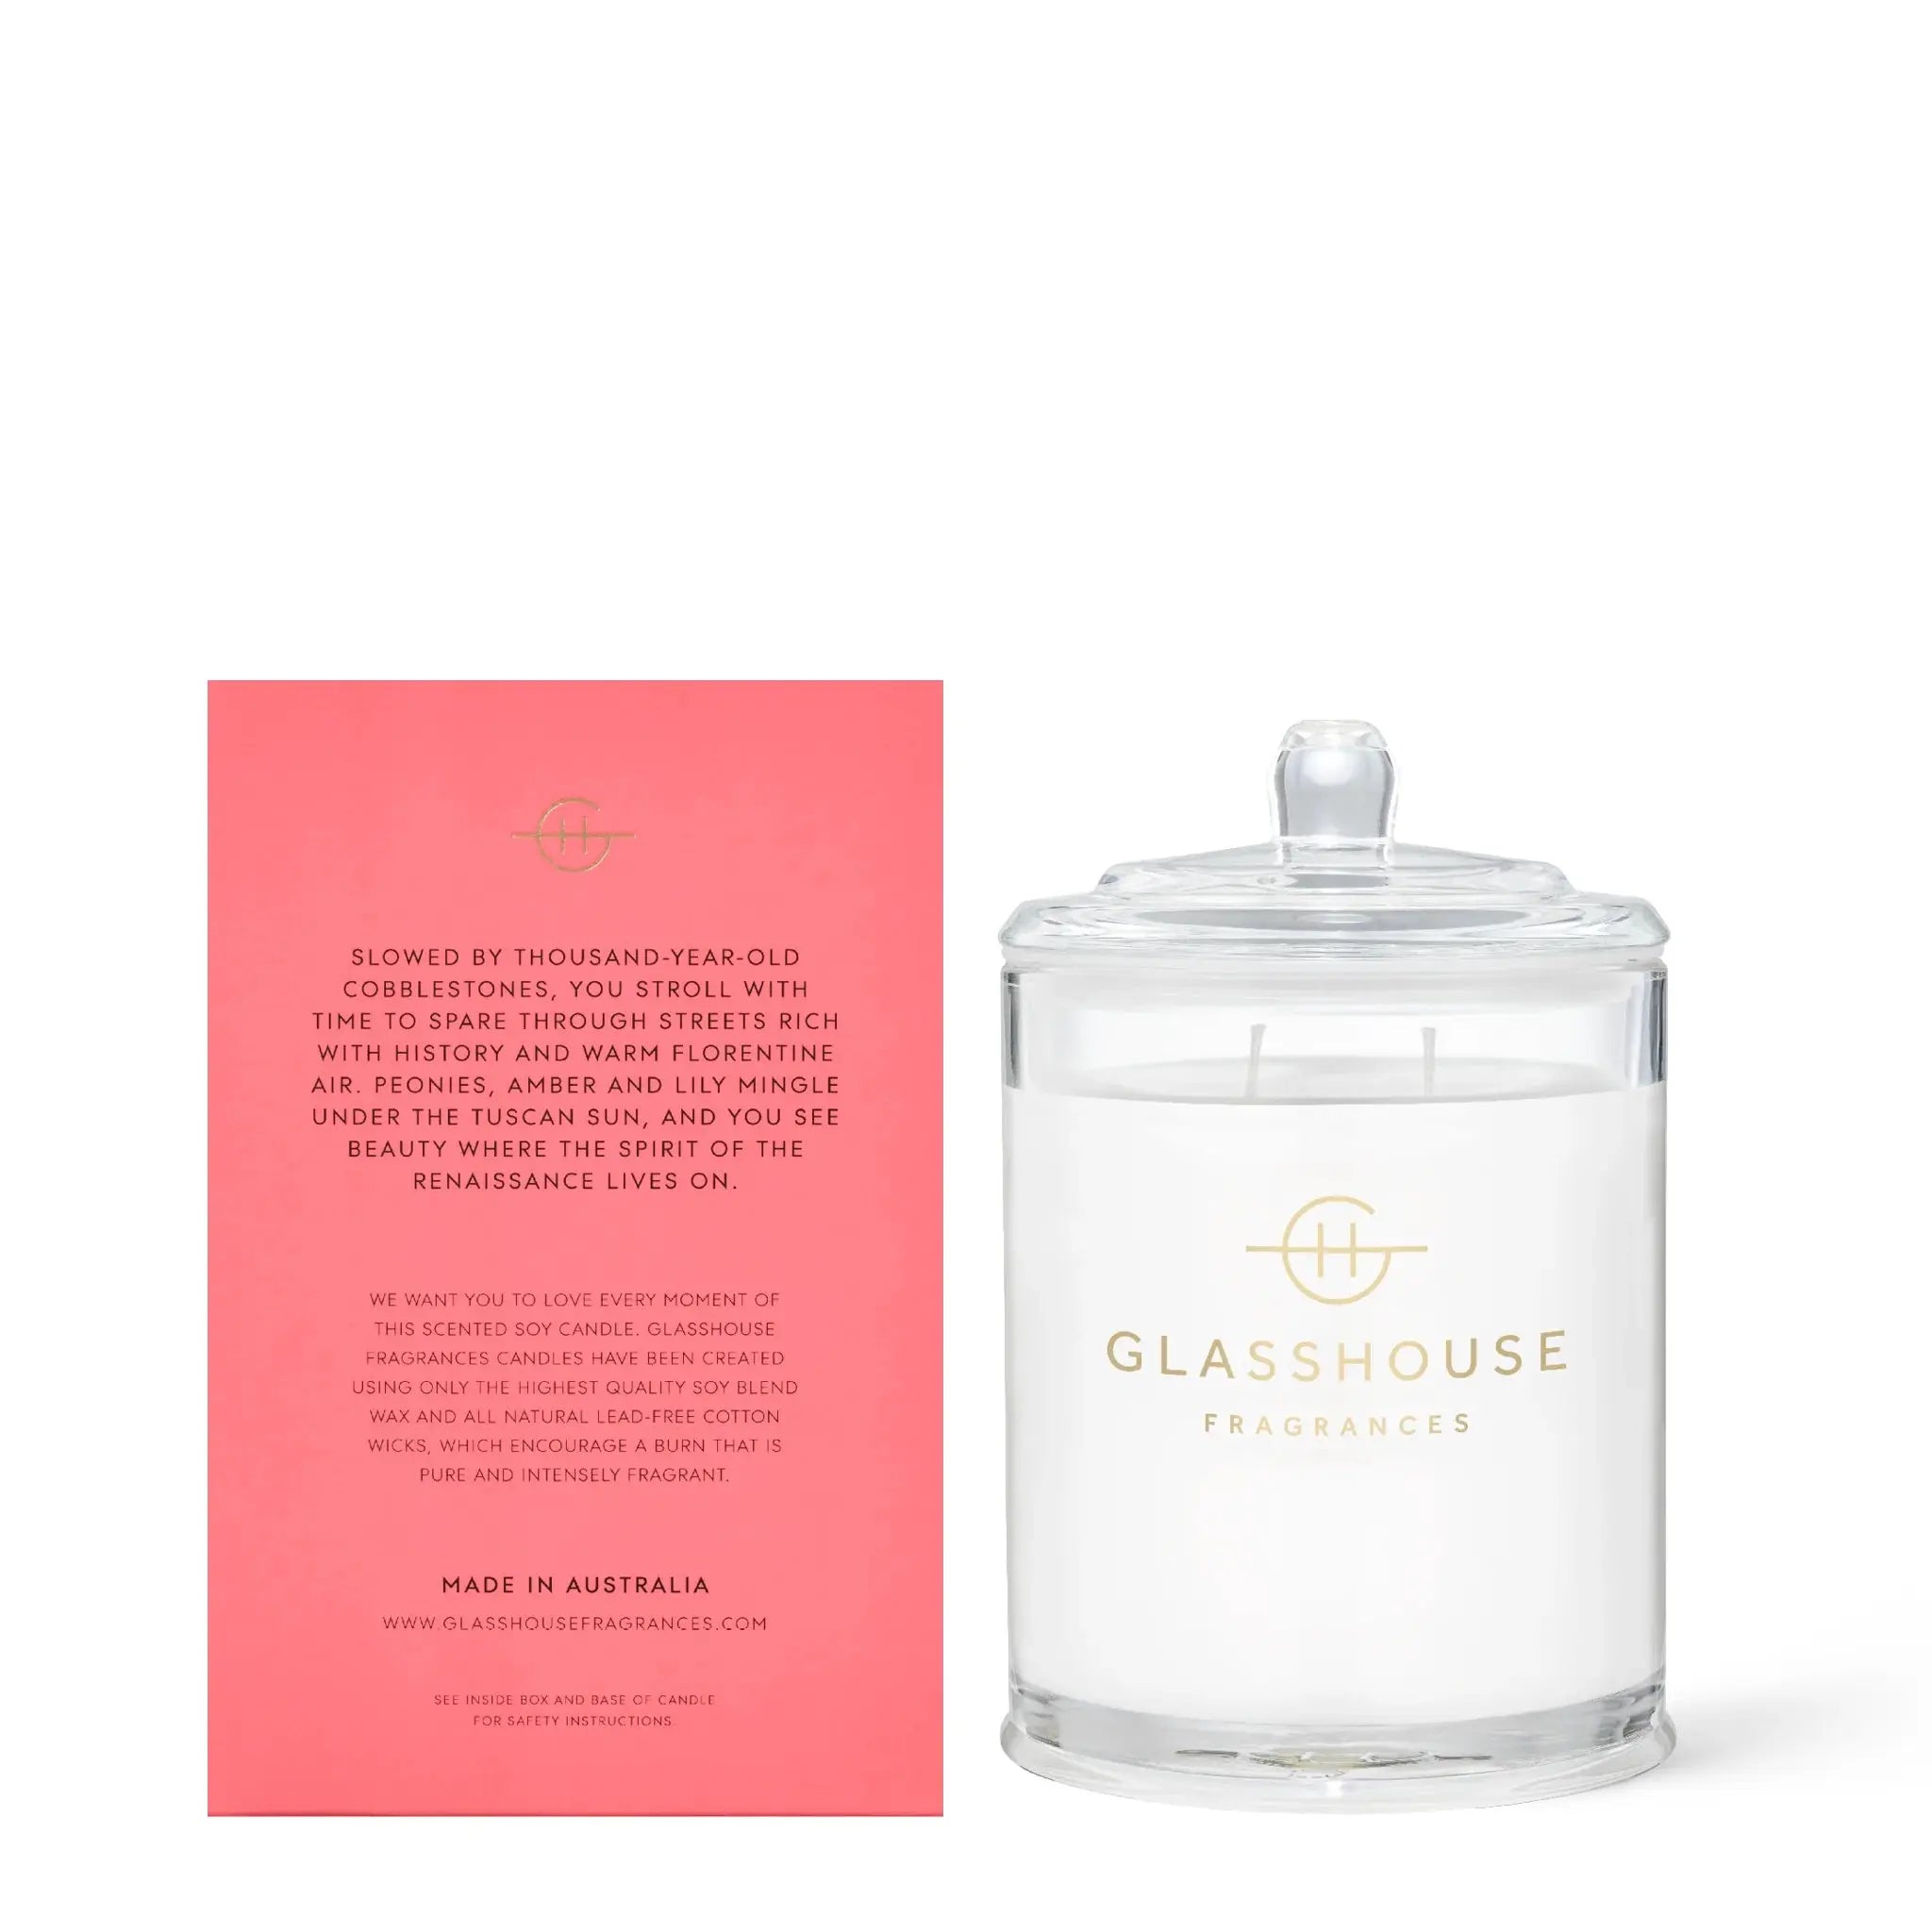 Slowed by Thousand-year-old cobblestones, you stroll with time to spare through streets rich with history and warm florentine air. Peonies, Amber and lily mingle under the tuscan sun, and you see beauty where the spirit of the renaissance lives on.We want you to love every moment of this scented soy candle. Glasshouse fragrances candles have been created using only the highest quality soy blend wax and all natural led-free cotton wicks, which encourage a burn that is pure and intensely fragrant. Made in Aus